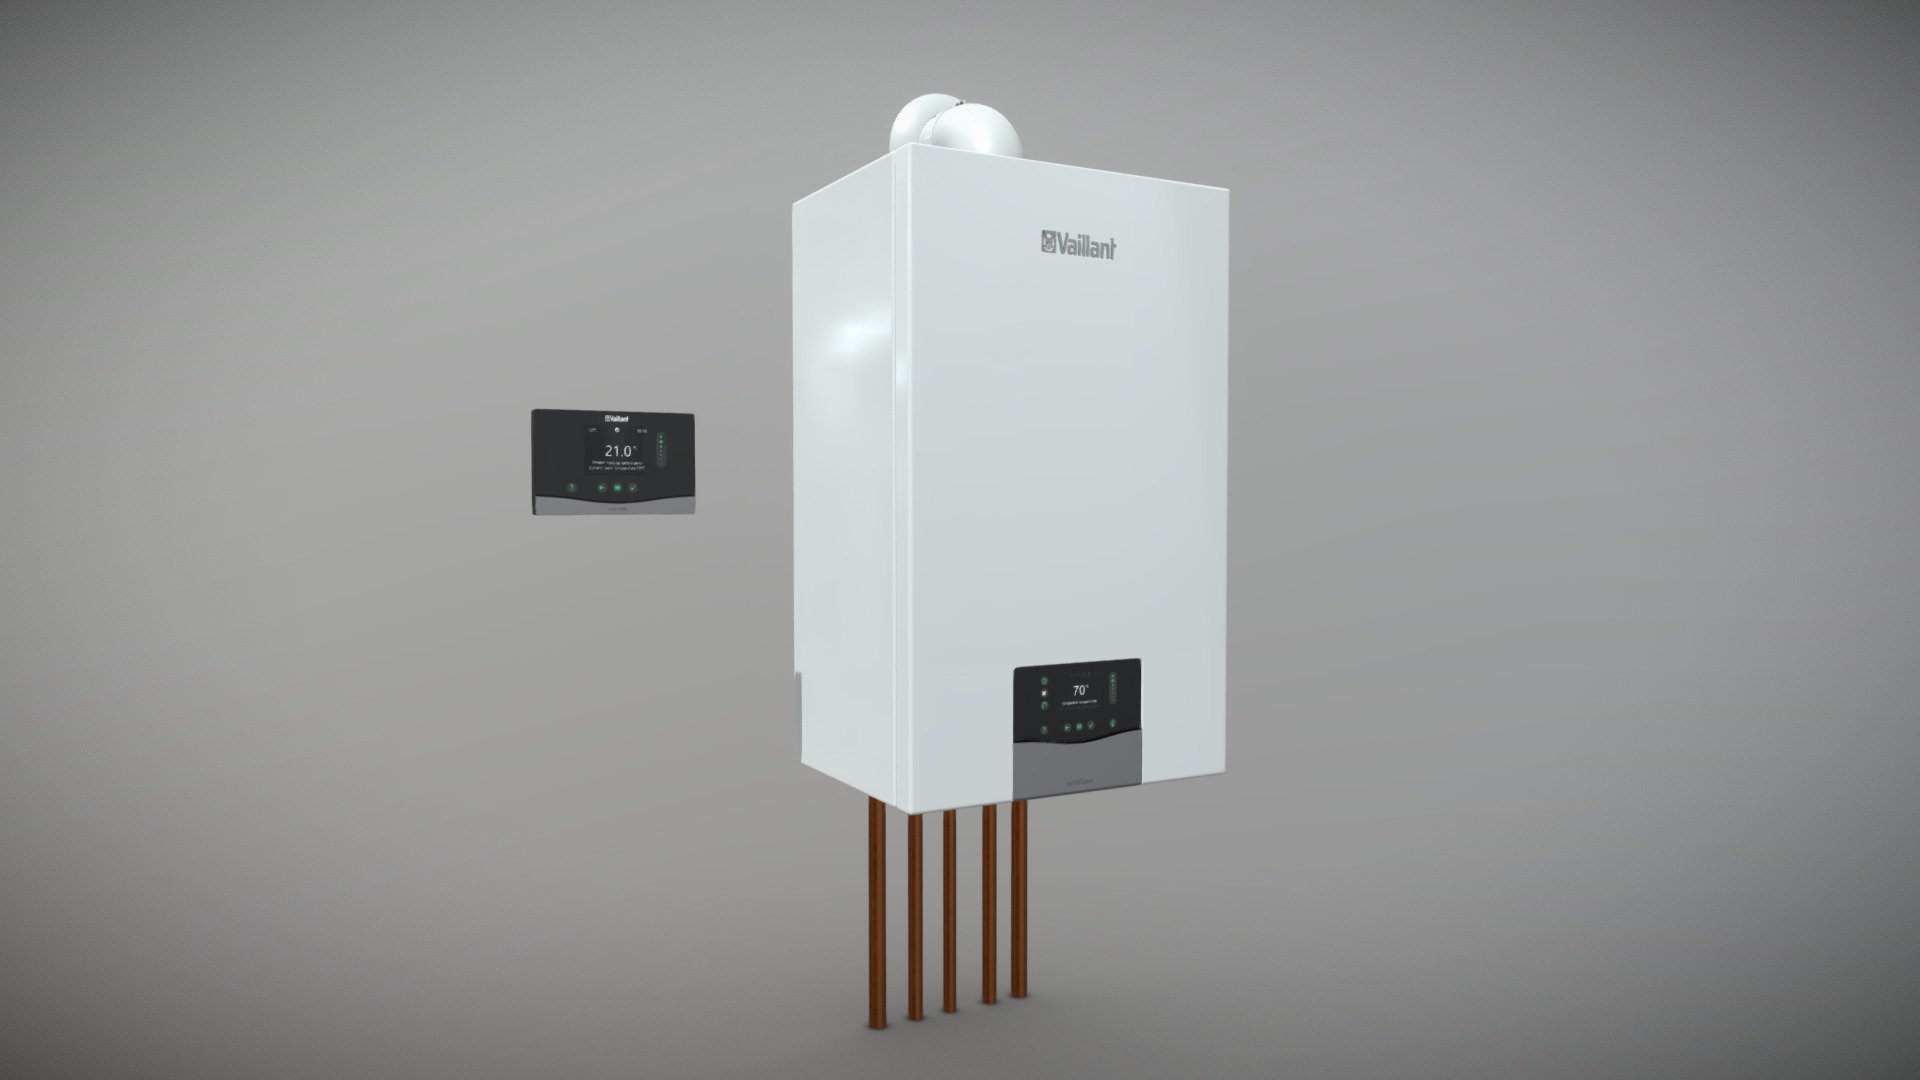 Realistic (copy) 3d model of ecoTEC plus gas boiler and sensoHOME VRT 380 Vaillant room regulator.

This set:
- 1 file obj standard
- 1 file 3ds Max 2013 vray material
- 1 file 3ds Max 2013 corona material
- 1 file of 3Ds
- 1 file blender cycles.

Topology of geometry:
- forms and proportions of The 3D model most similar to the real object
- the geometry of the model was created very neatly
- there are no many-sided polygons
- detailed enough for close-up renders

Materials and Textures:
- 3ds max files included Vray-Shaders
- 3ds max files included Corona-Shaders
- Blender files included cycles shaders
- all texture paths are cleared

Organization of scene:
- to all objects and materials names in scene are appropriated
- real world size (system units - mm)
- coordinates of location of the model in space (x0, y0, z0)
- does not contain extraneous or hidden objects (lights, cameras, shapes etc.) - Gas boiler and Vaillant room regulator - Buy Royalty Free 3D model by madMIX 3d model